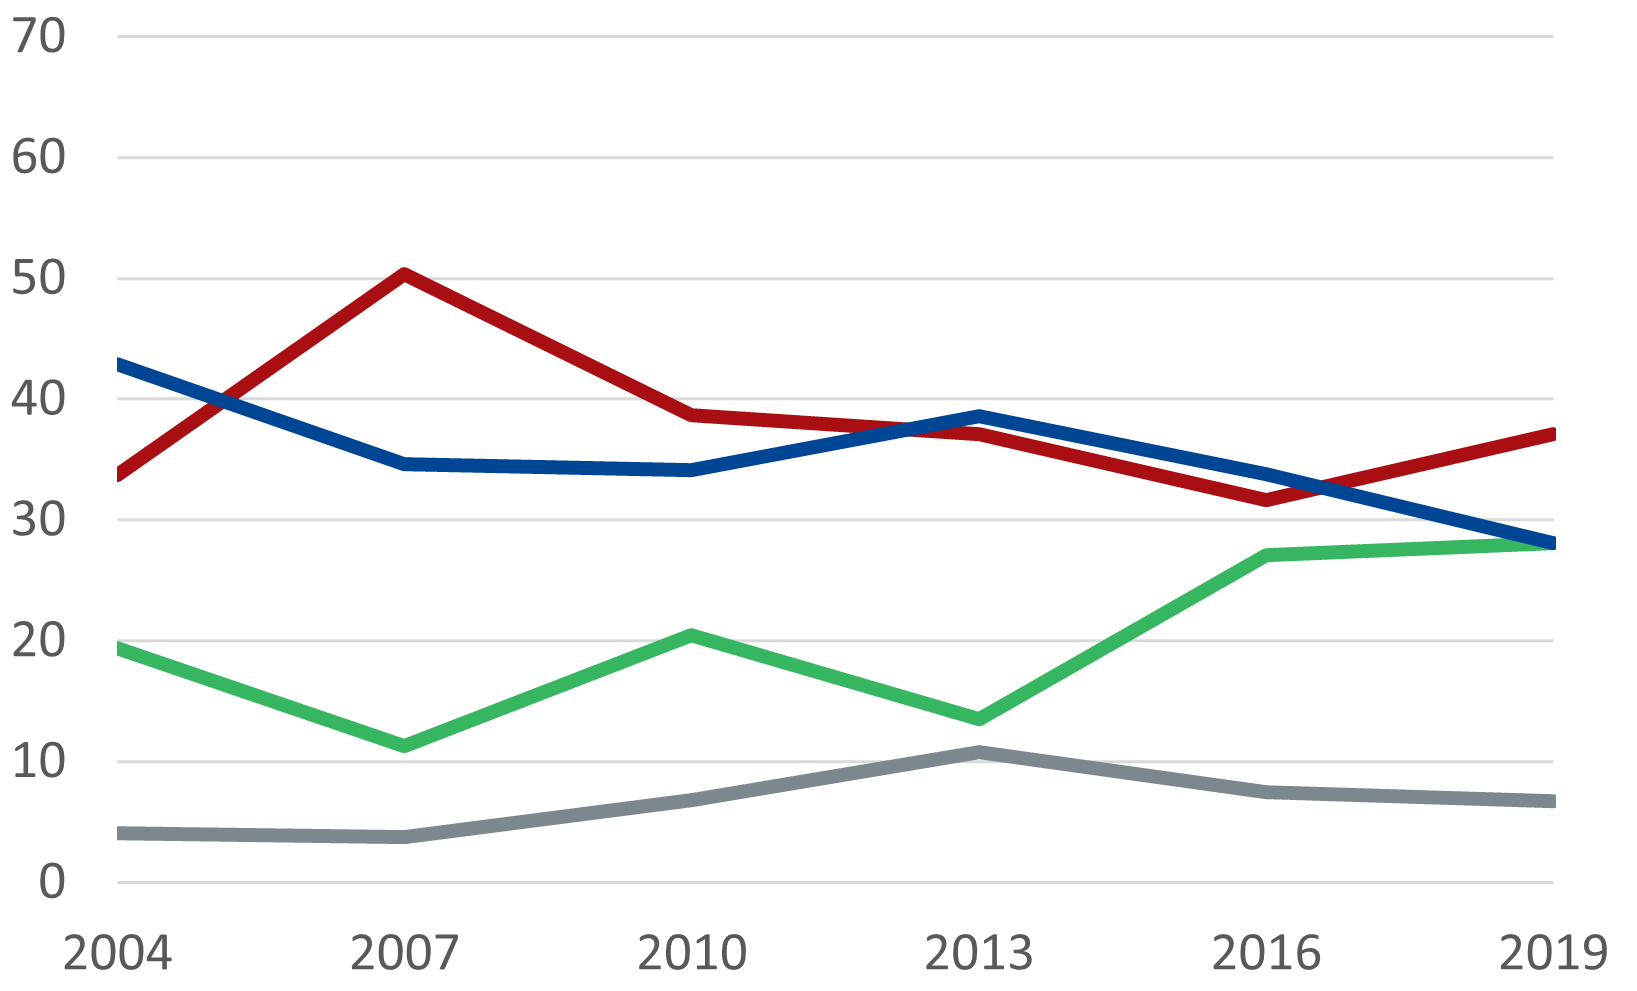 Graph of Millennials’ first preference percentage by party, elections 2004 to 2019